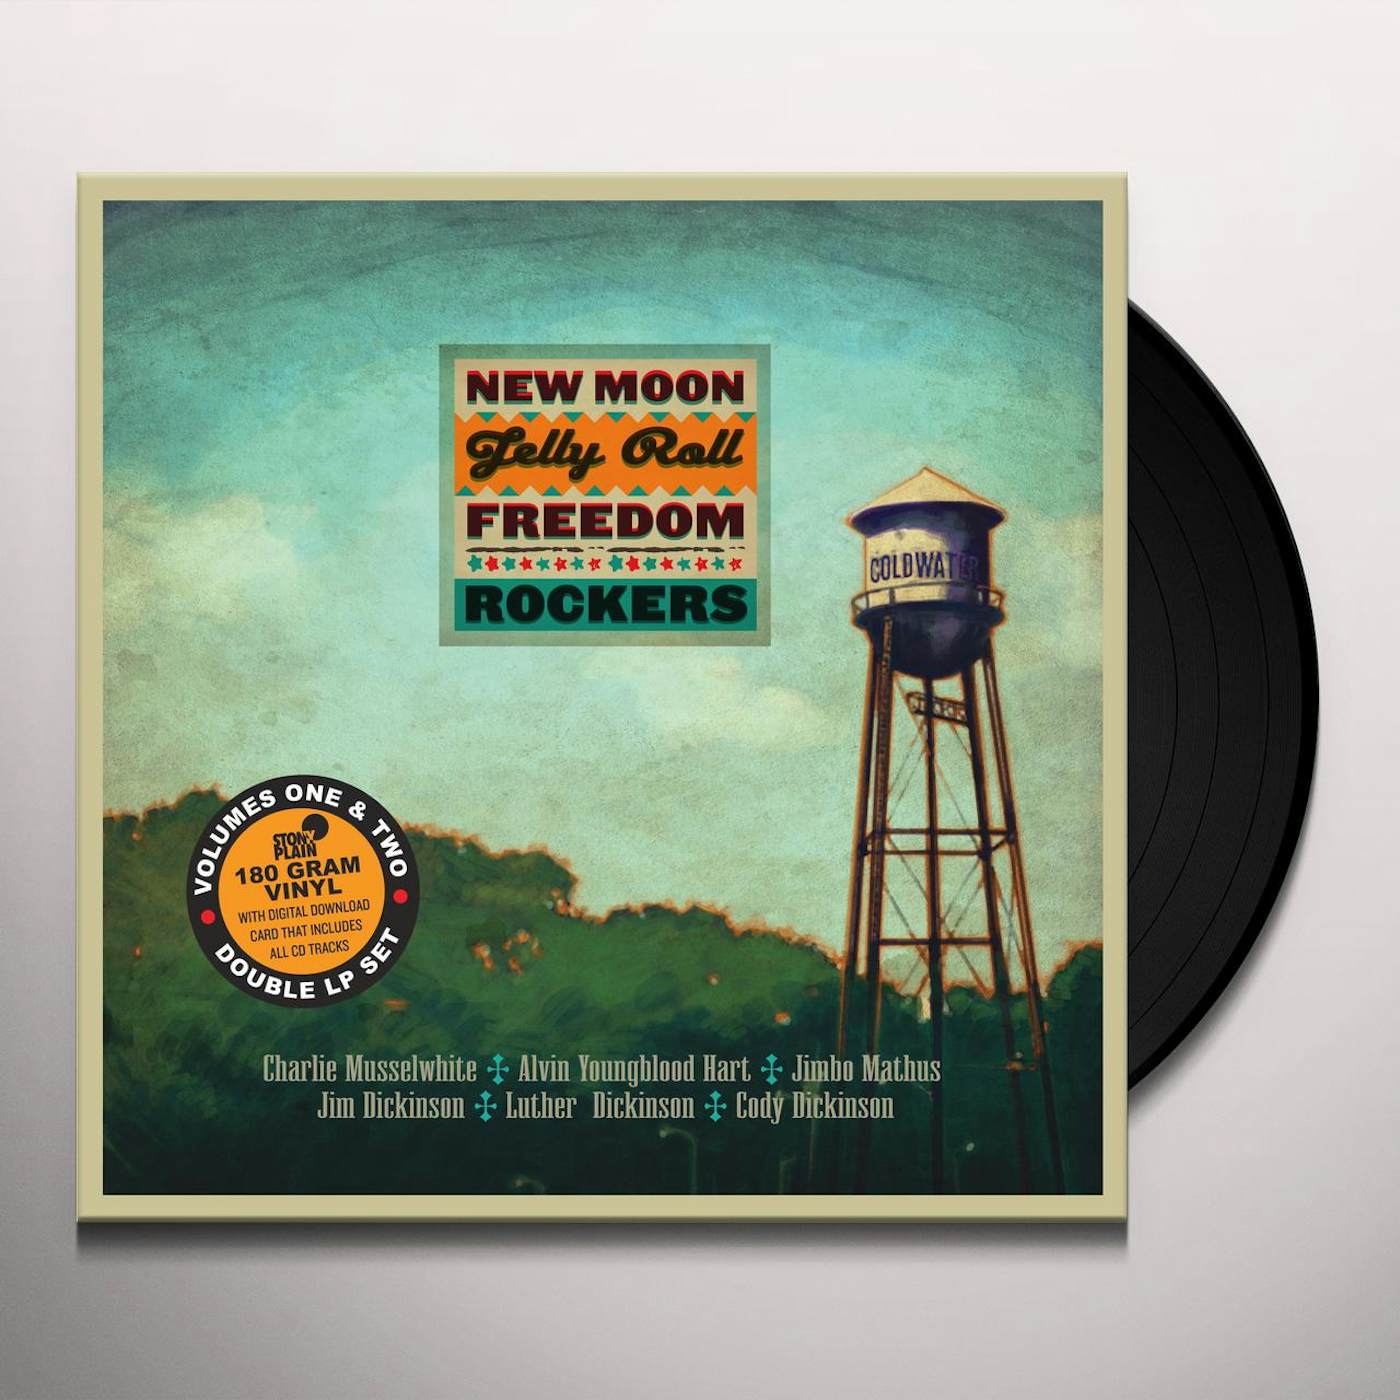 New Moon Jelly Roll Freedom Rockers VOLUME 1 AND 2 Vinyl Record